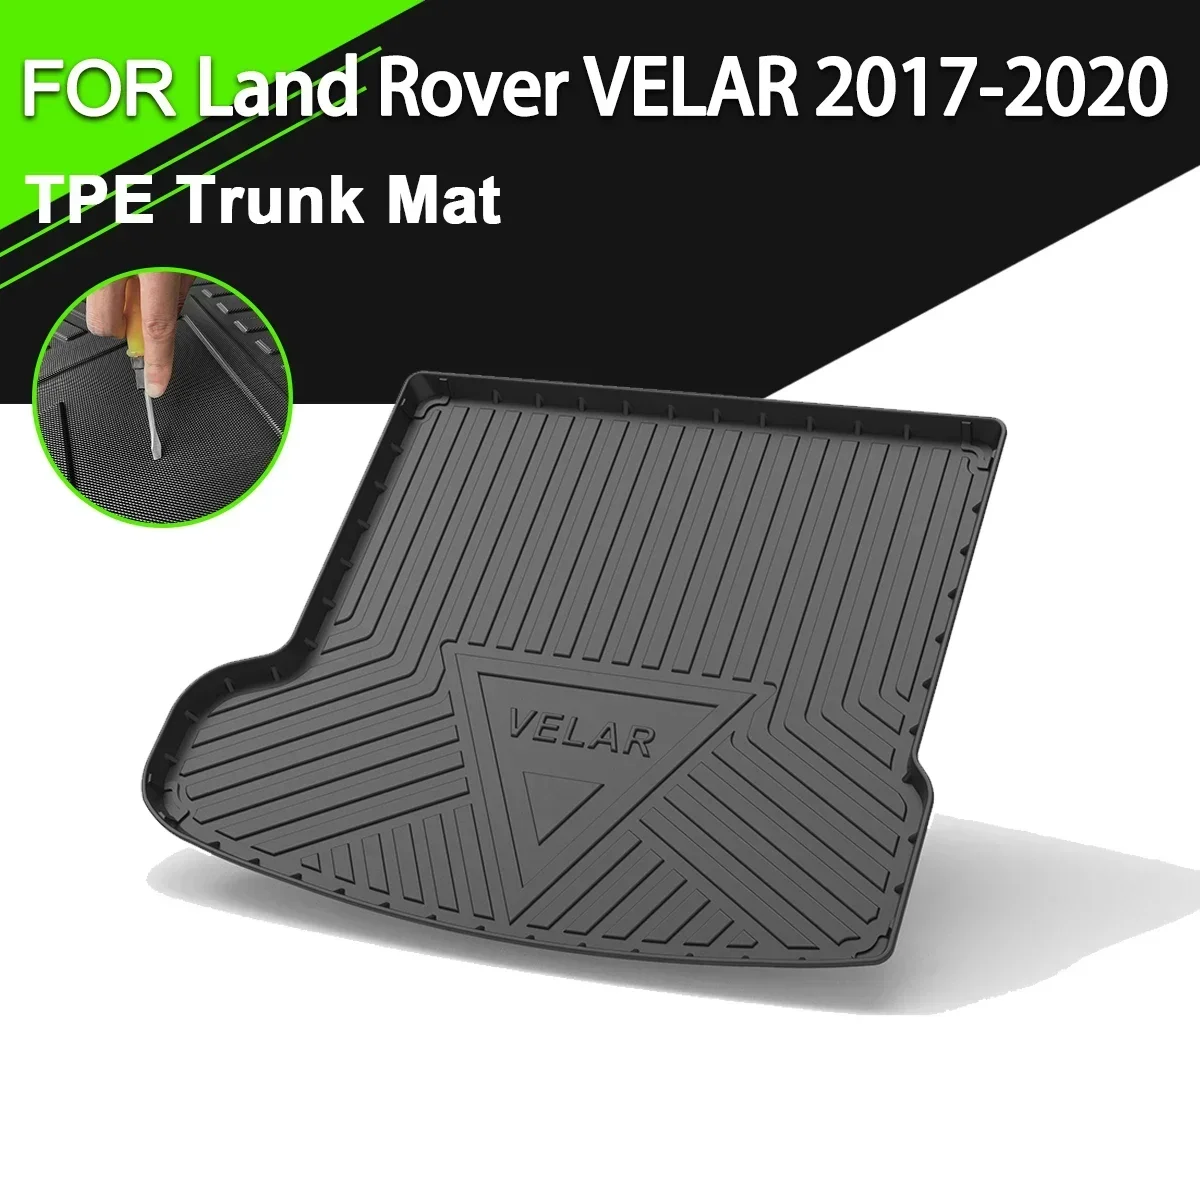 

Car Rear Trunk Cover Mat For Land Rover VELAR 2017-2020 TPE Waterproof Non-Slip Rubber Cargo Liner Accessories